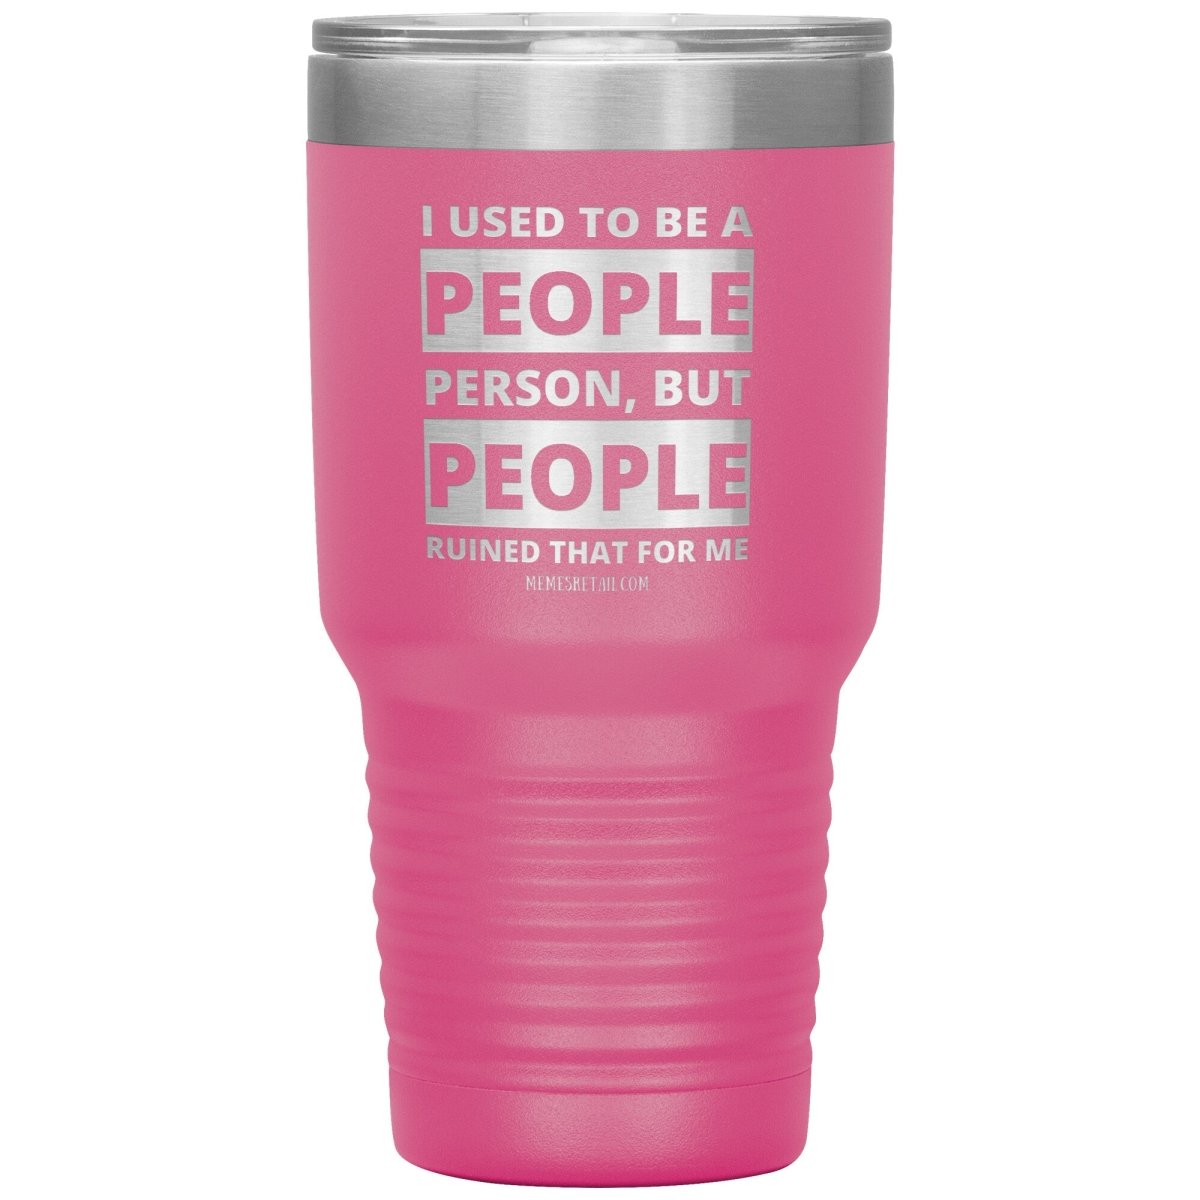 I Used To Be A People Person, But People Ruined That For Me Tumblers, 30oz Insulated Tumbler / Pink - MemesRetail.com